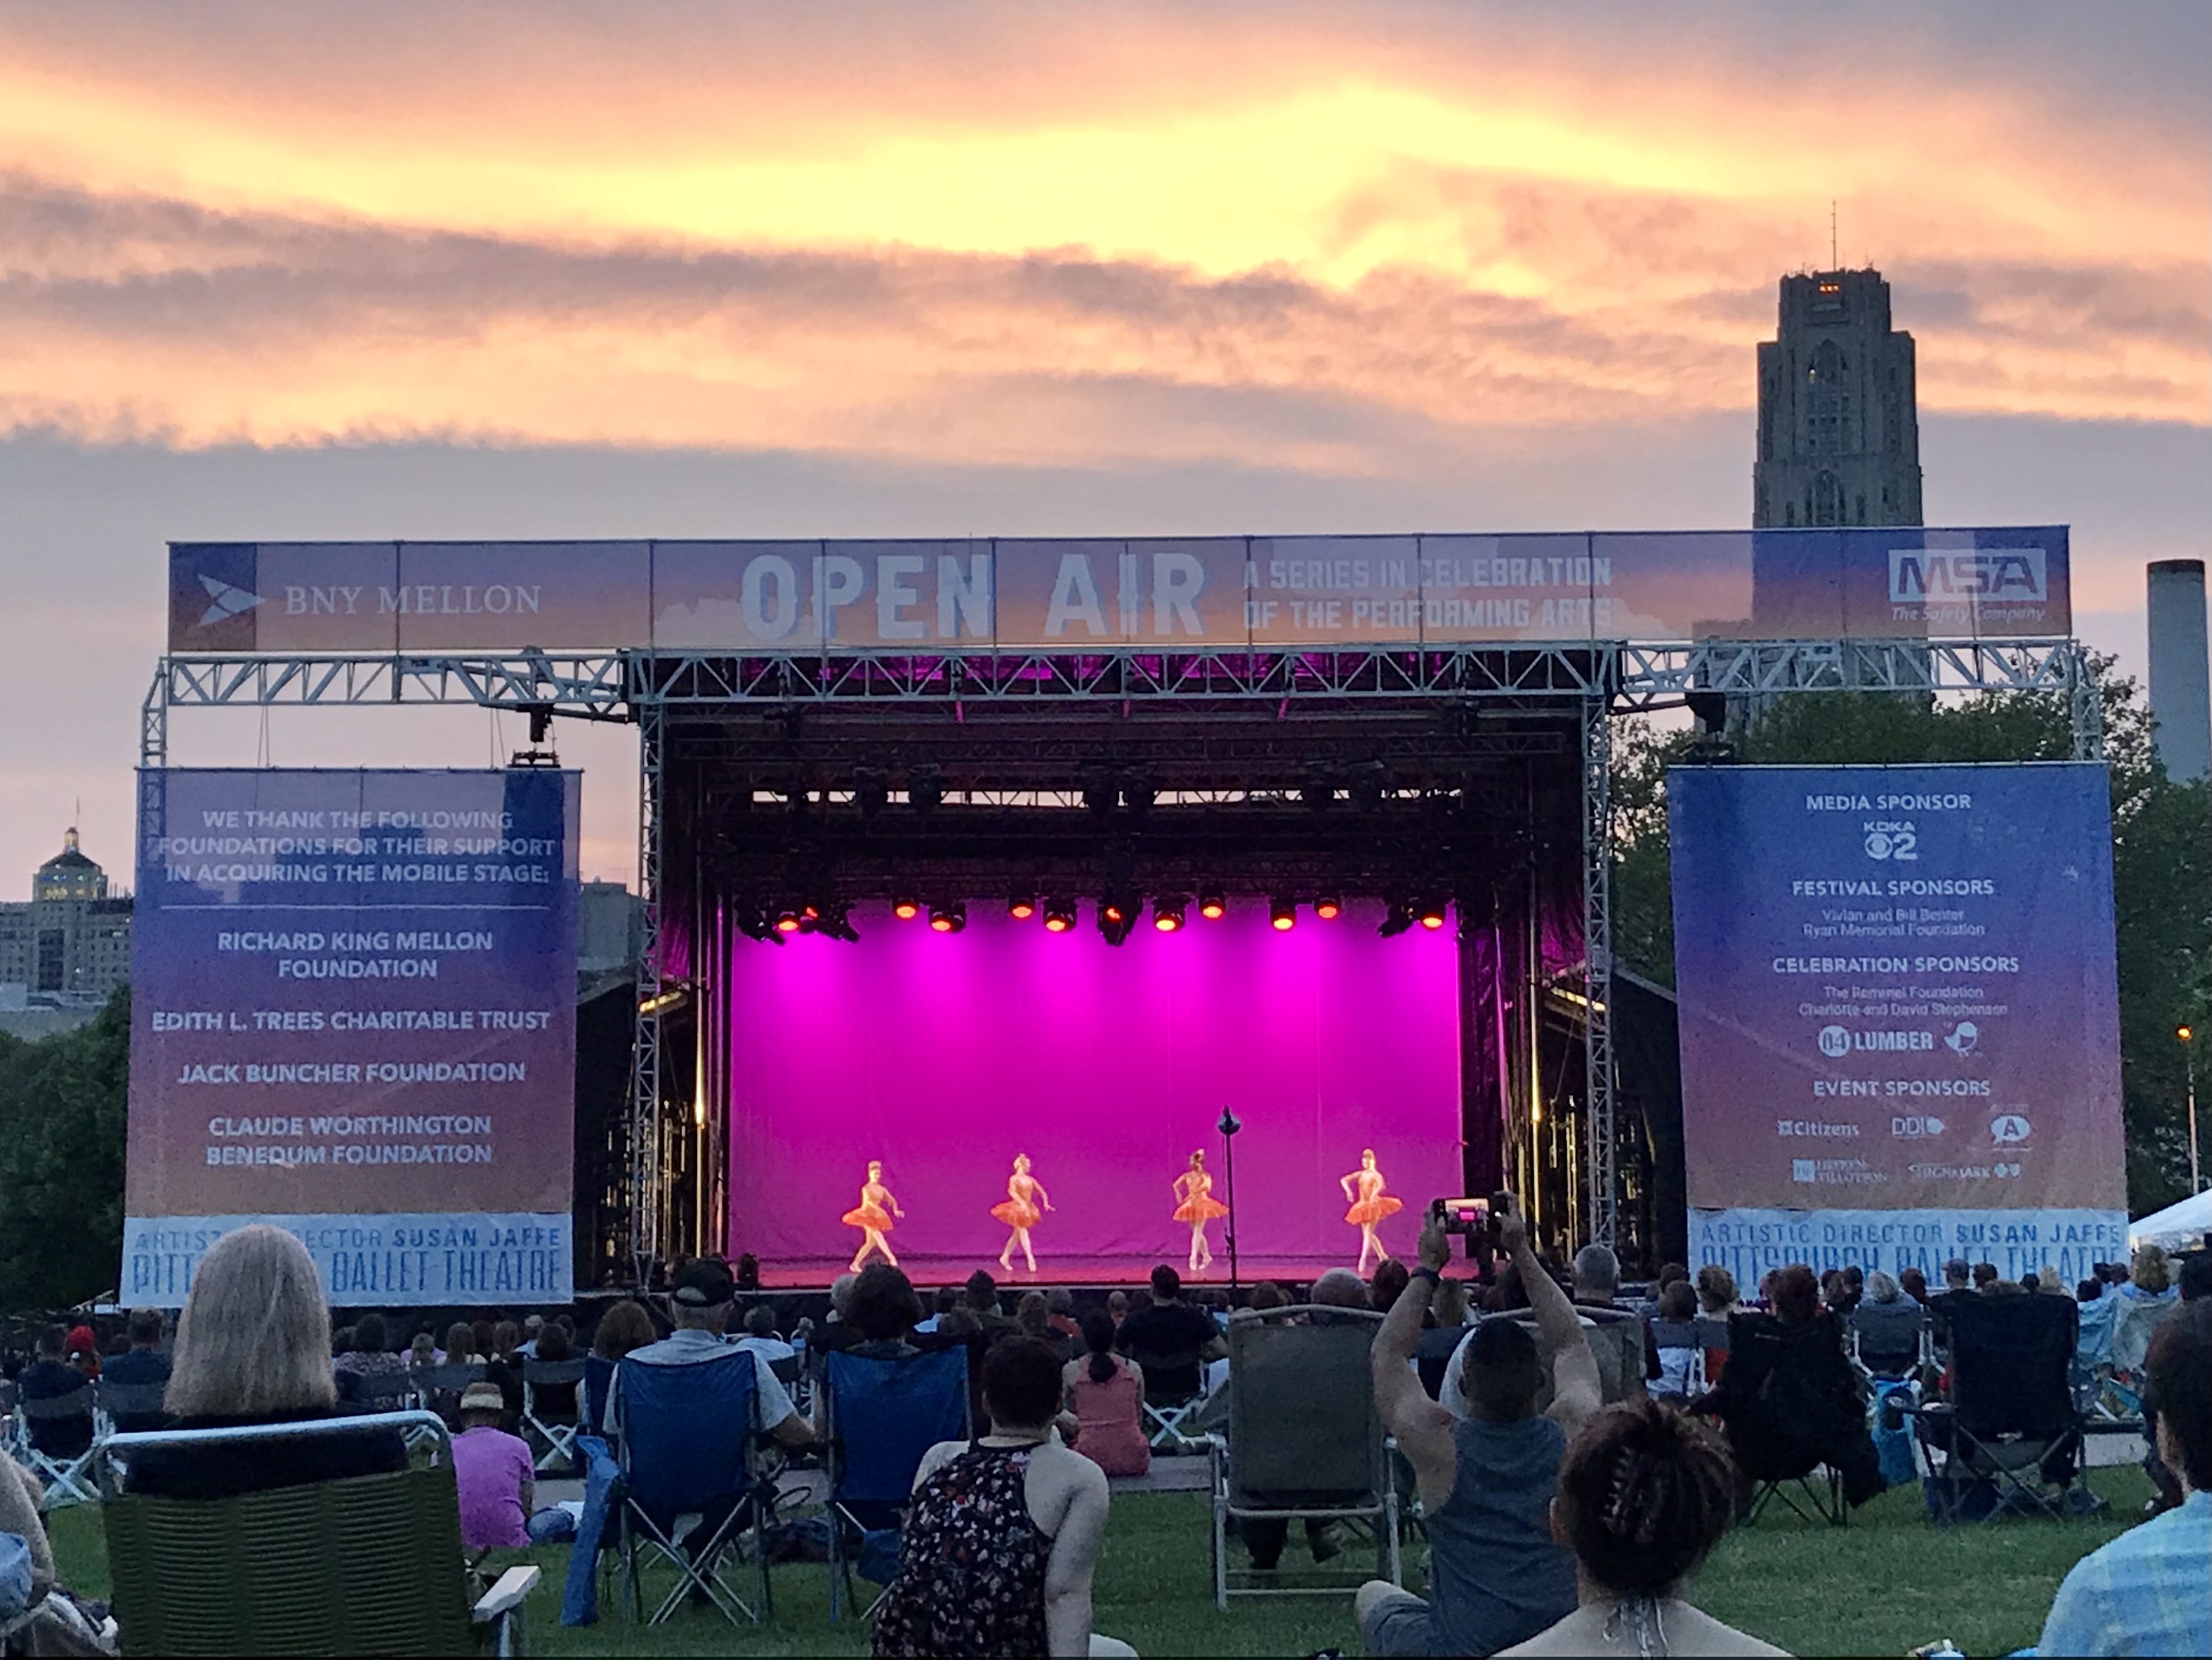 Pittsburgh Ballet Theatre's Open Air stage at dusk with pink lighting and four dancers onstage; audience watching from the lawn on Flagstaff Hill in Schenley Park.